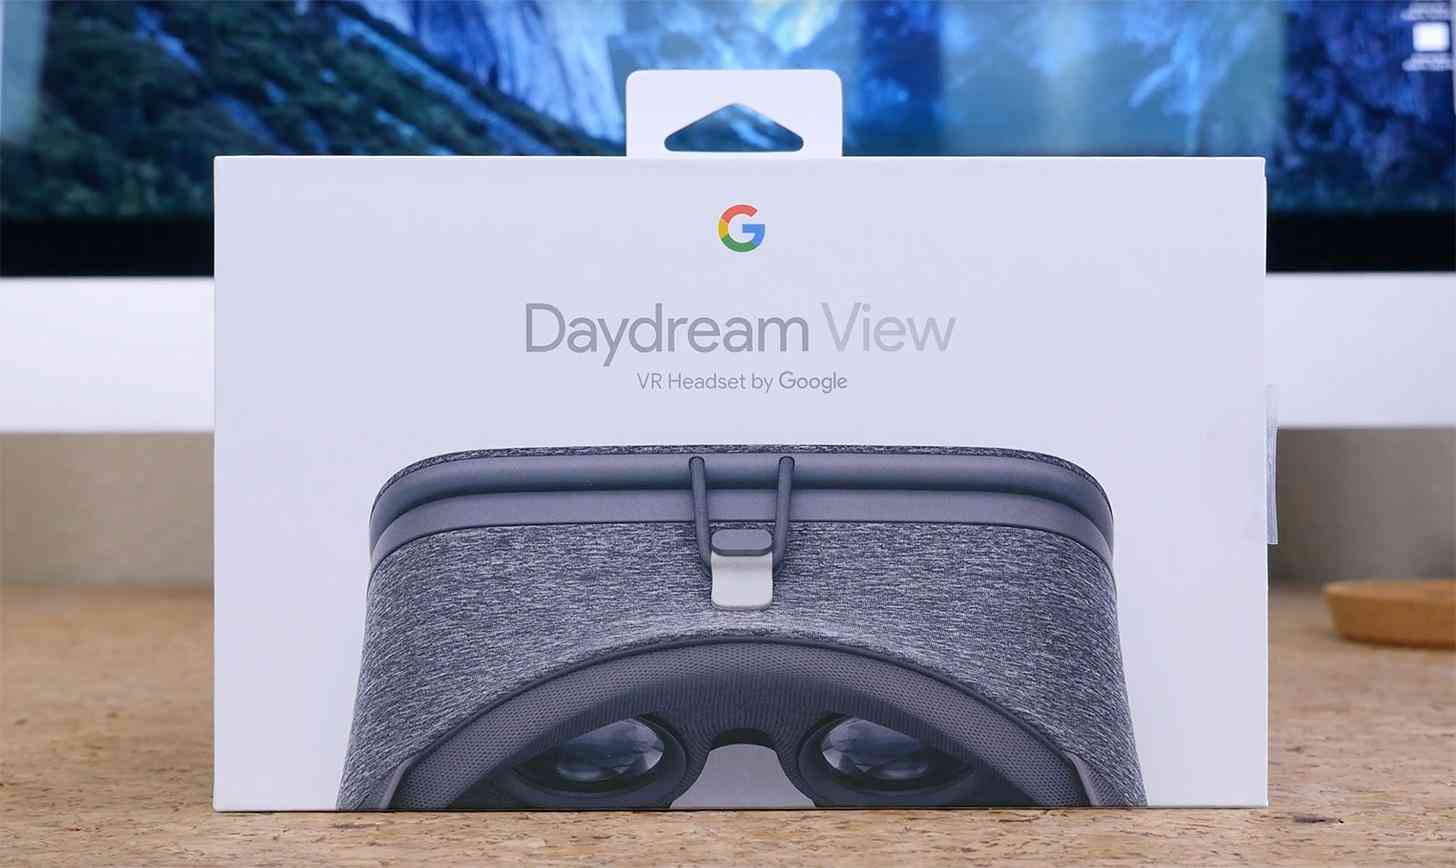 Google Daydream View VR headset on sale for $30 off